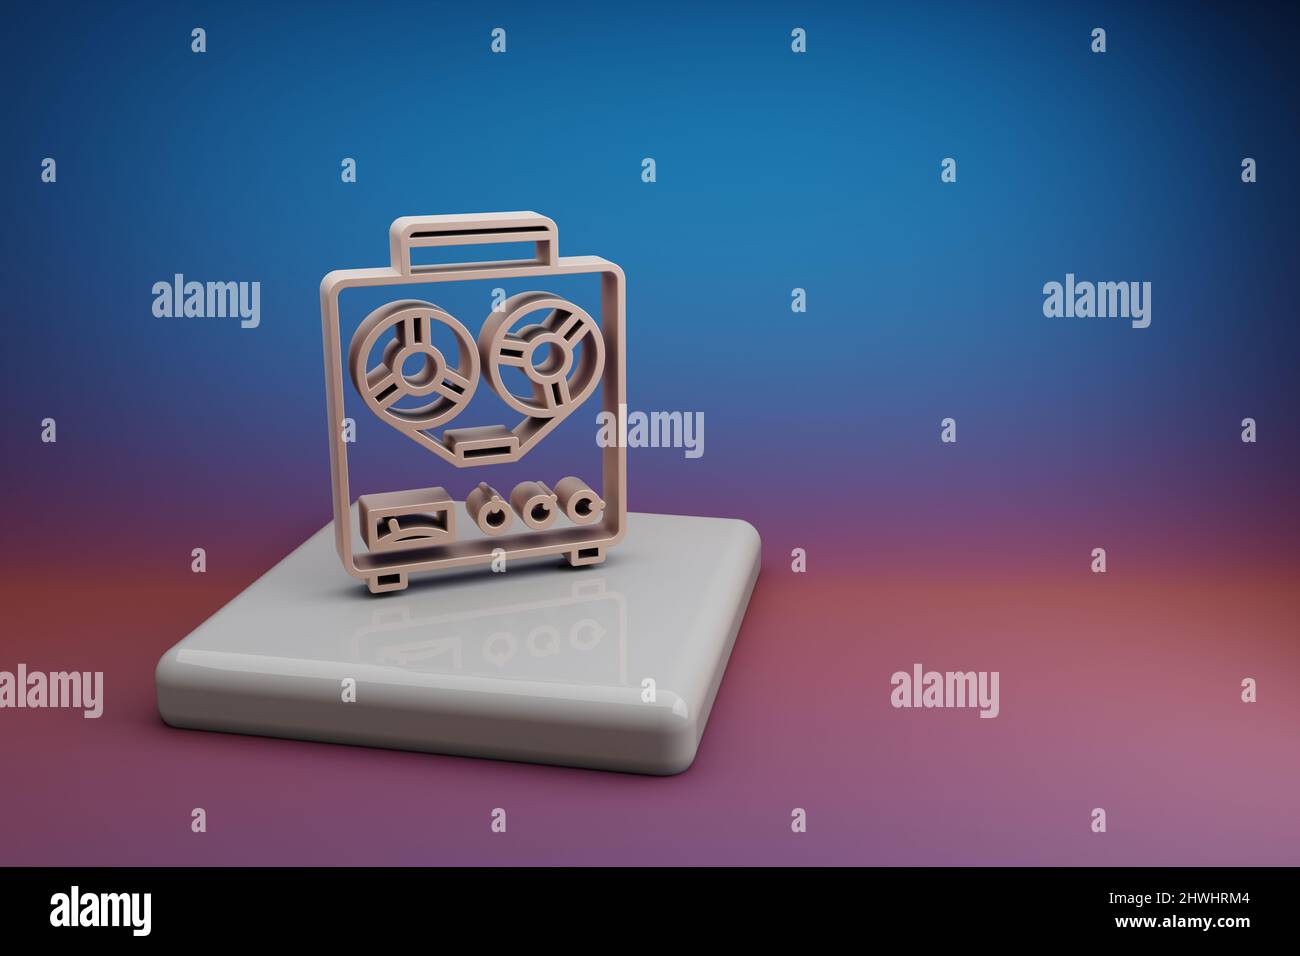 Wonderful  Old Audio Recorder. Beautiful music symbol icons on a ceramic stand and bright colored background. 3d rendering illustration. Background pa Stock Photo